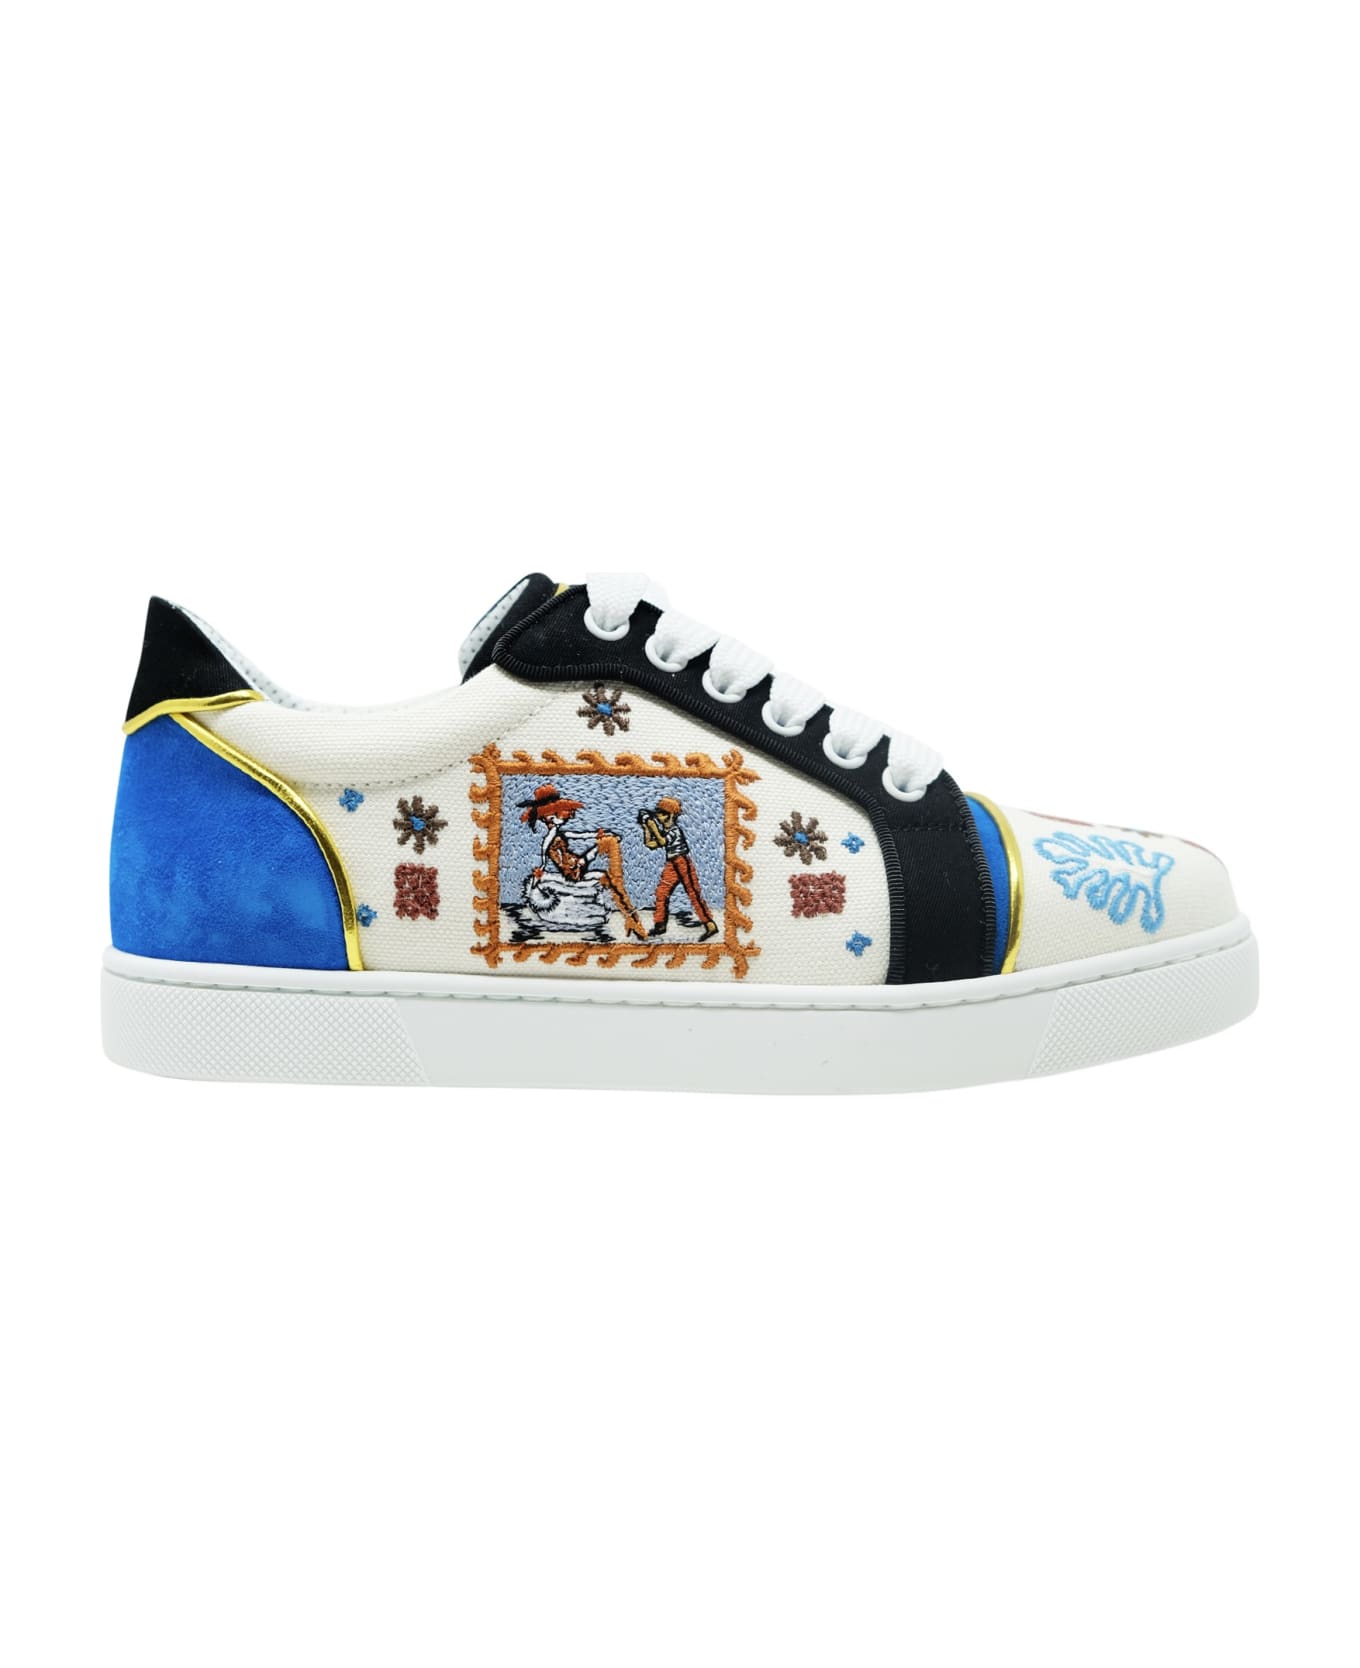 Christian Louboutin 3220060 Cma3 Multi Leather Olona Brodee Vieira Sneakers - MULTICOLOR スニーカー